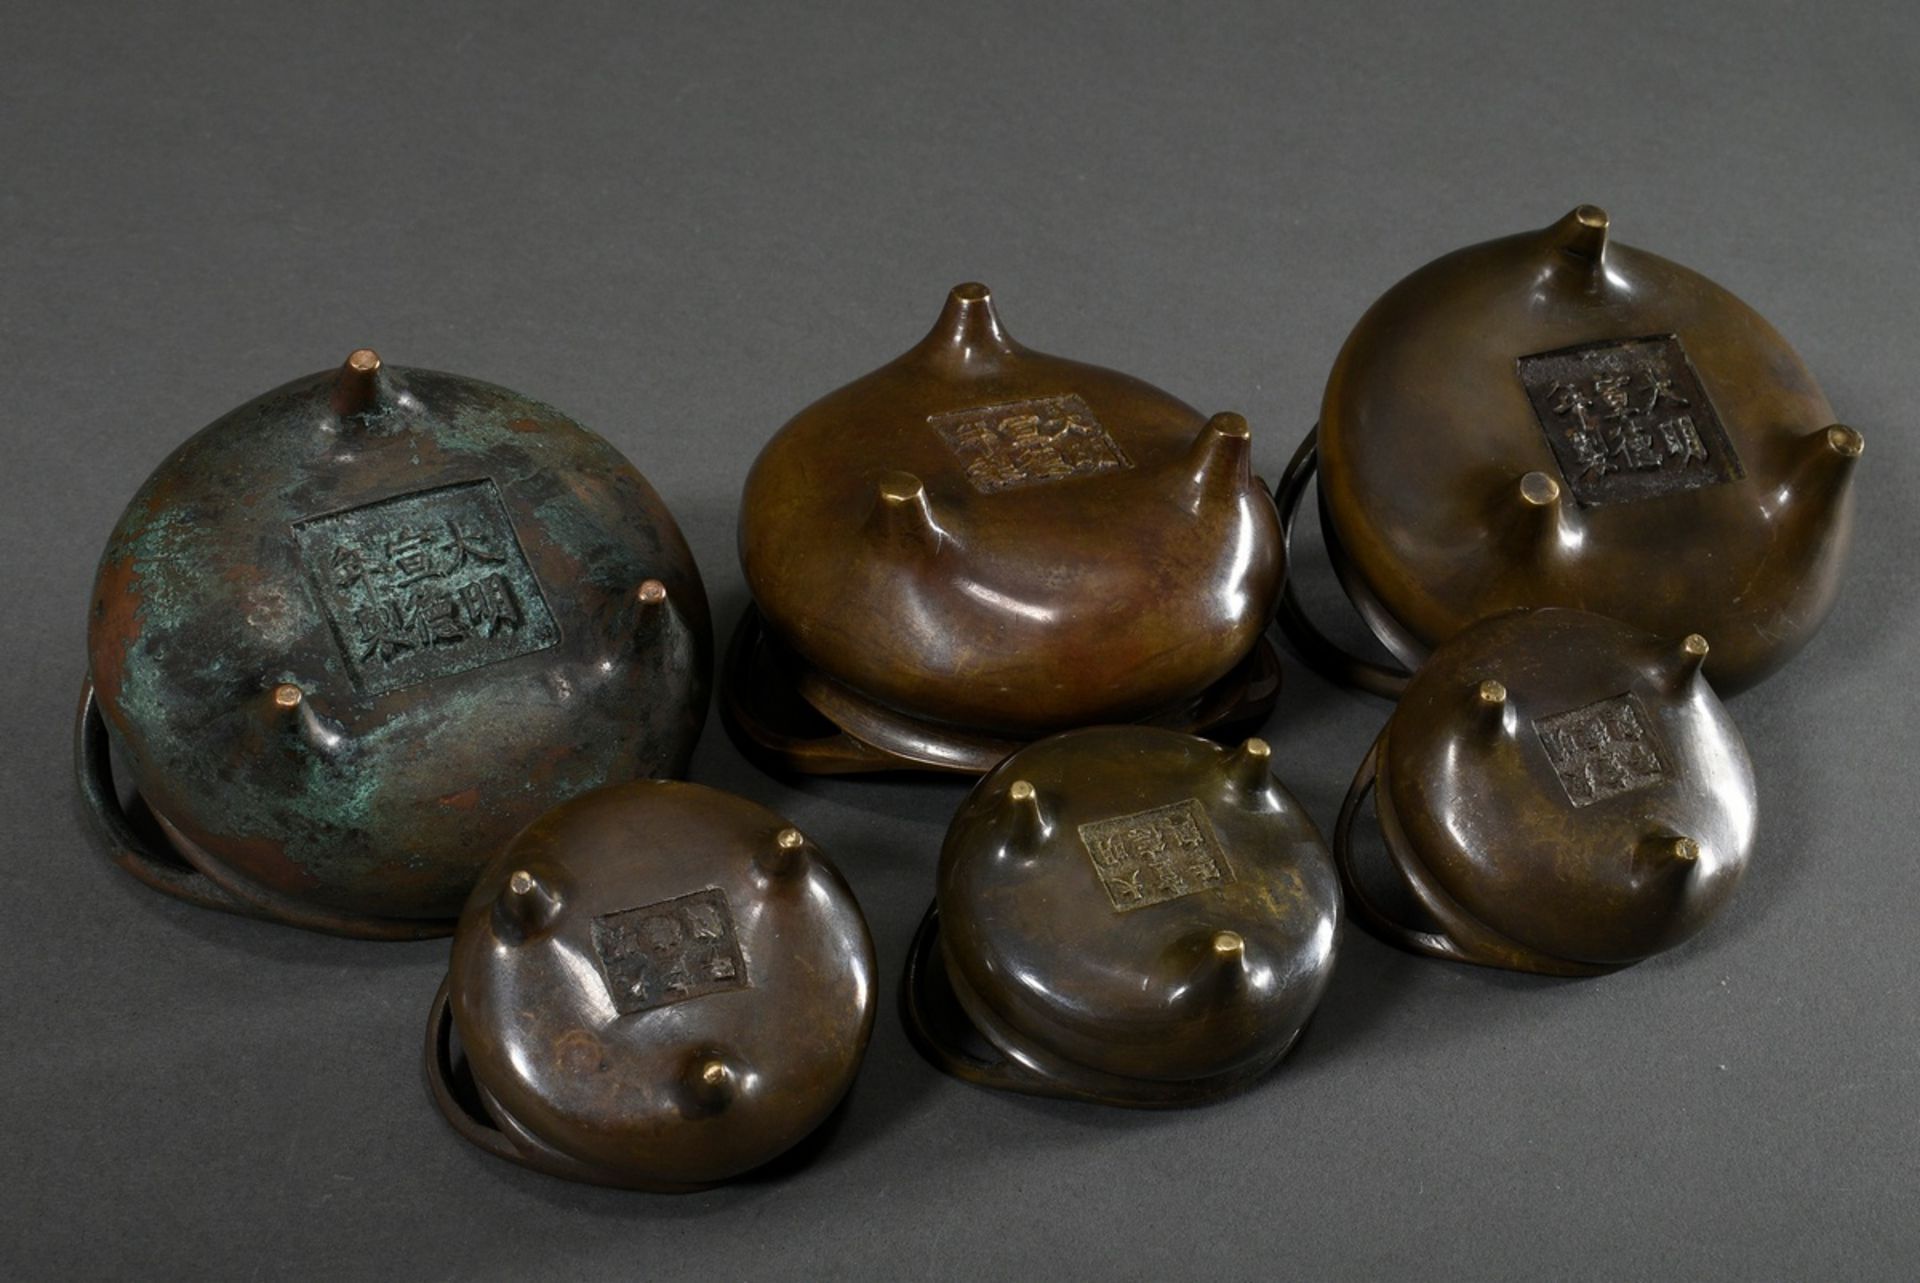 6 Various bronze censers in clear shape, different ages and sizes, Xuande marks on verso, inside pa - Image 2 of 7